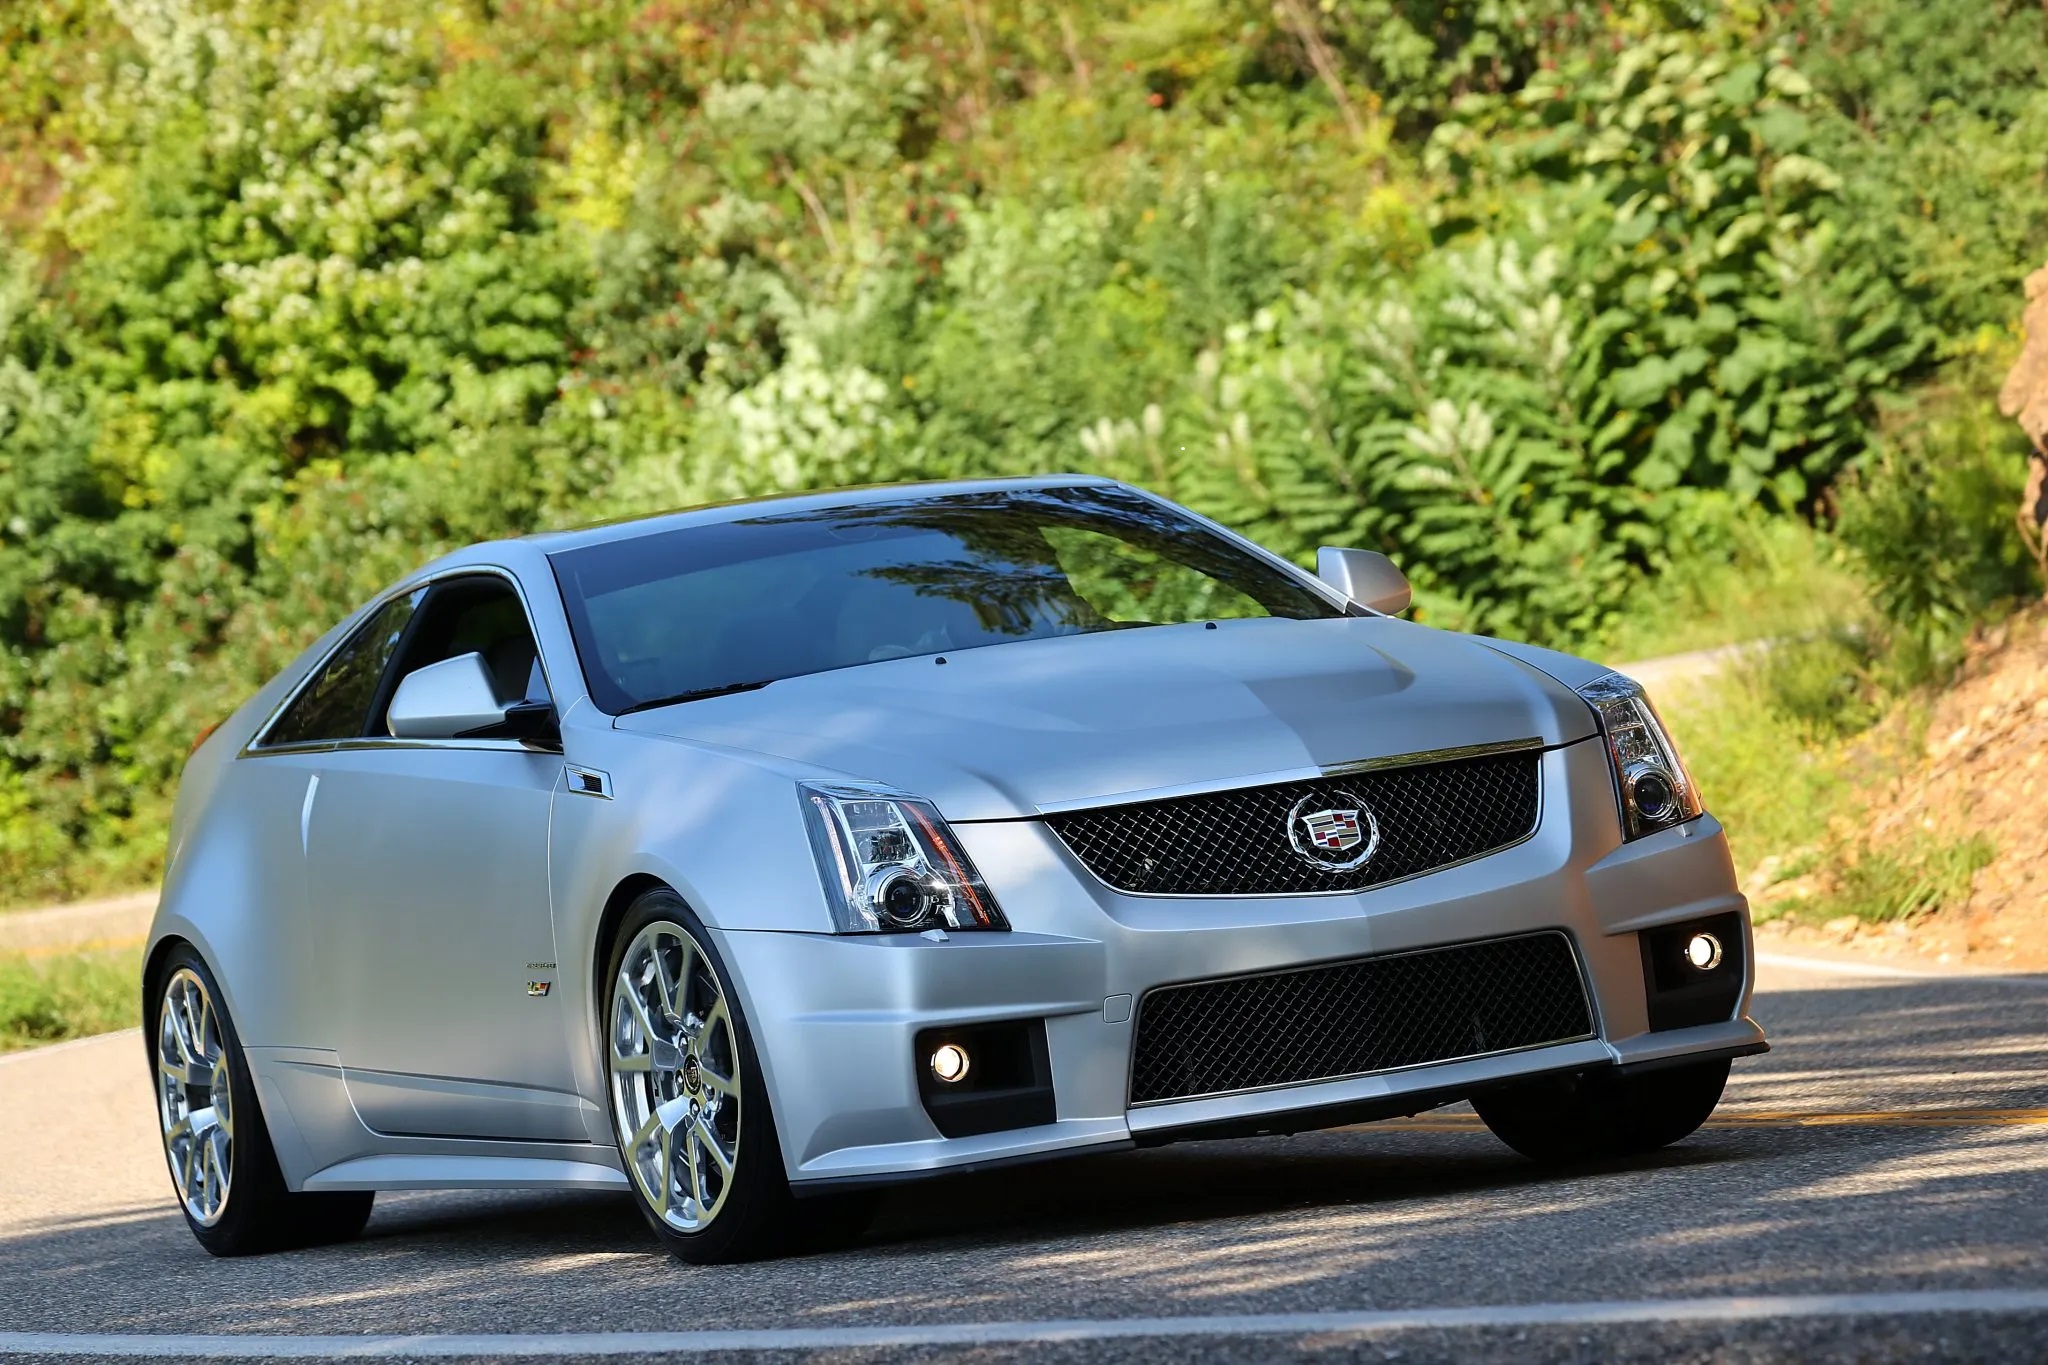 2013_cadillac_cts-v-coupe_3432303-32957-scaled.jpg